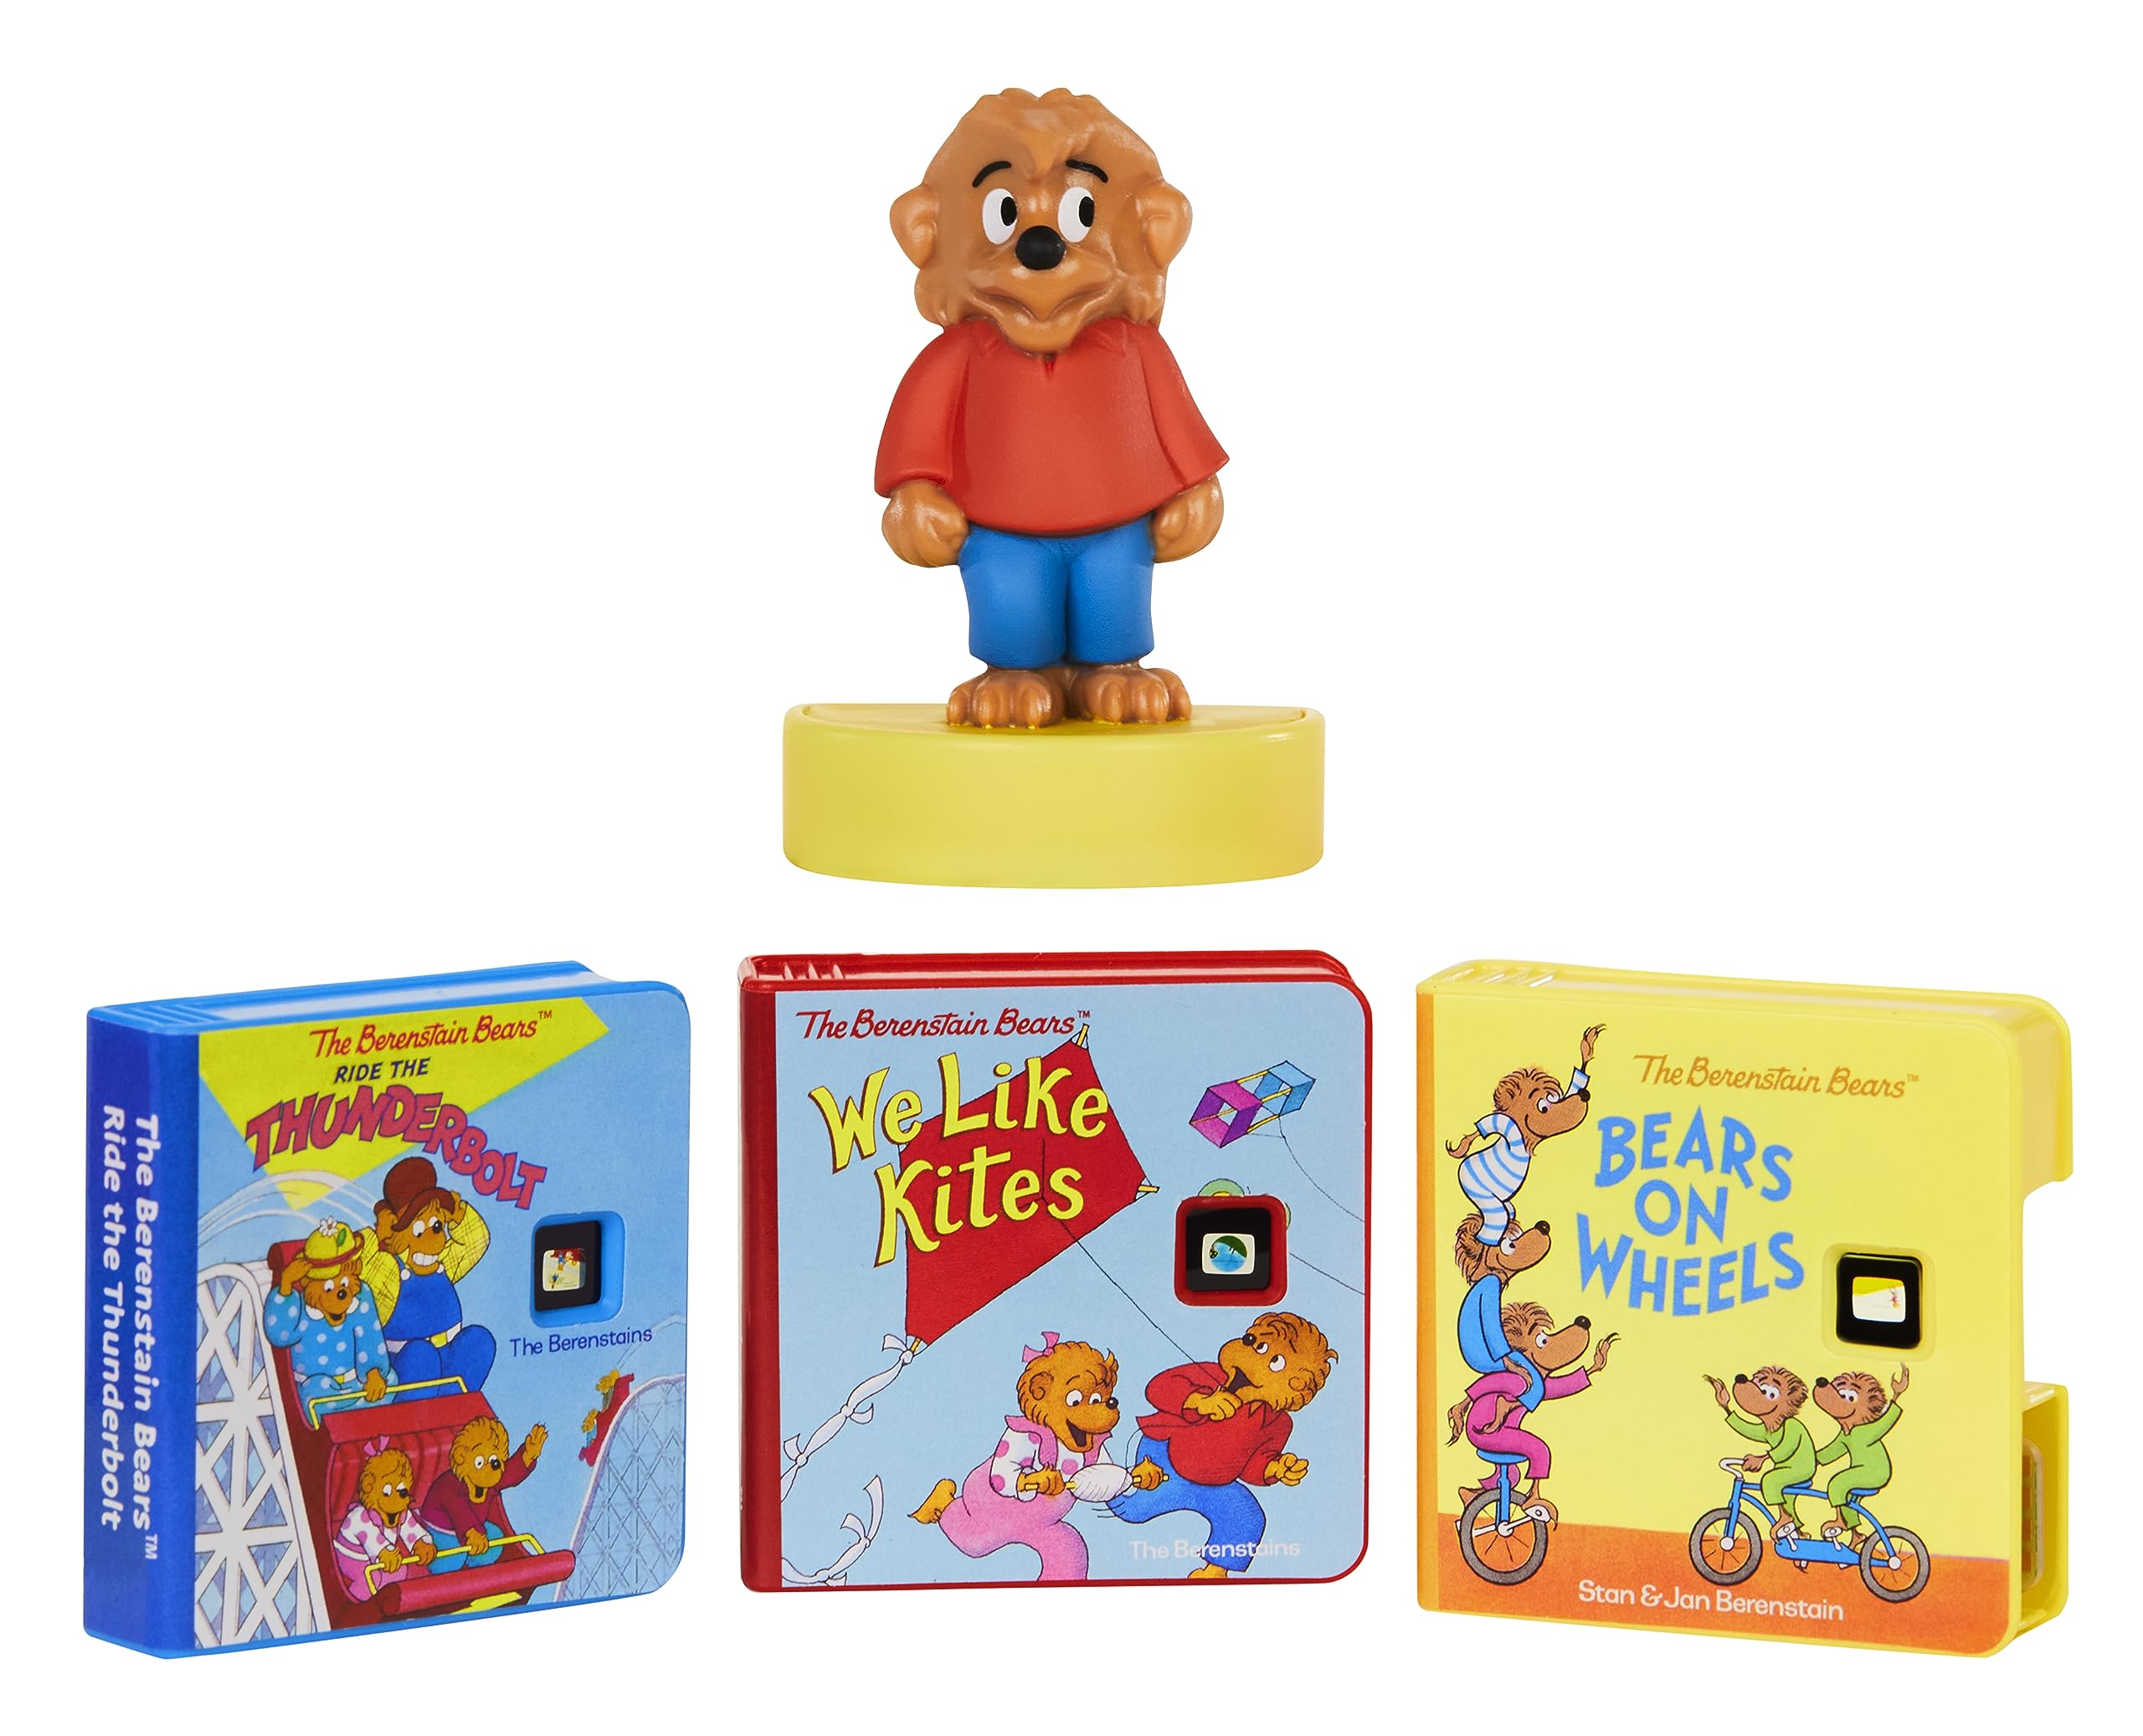 Little Tikes Story Dream Machine The Berenstain Bears Adventure Story Collection, Storytime, Books, Random House, Audio Play Character, Gift and Toy for Toddlers and Kids Girls Boys Ages 3+ Years